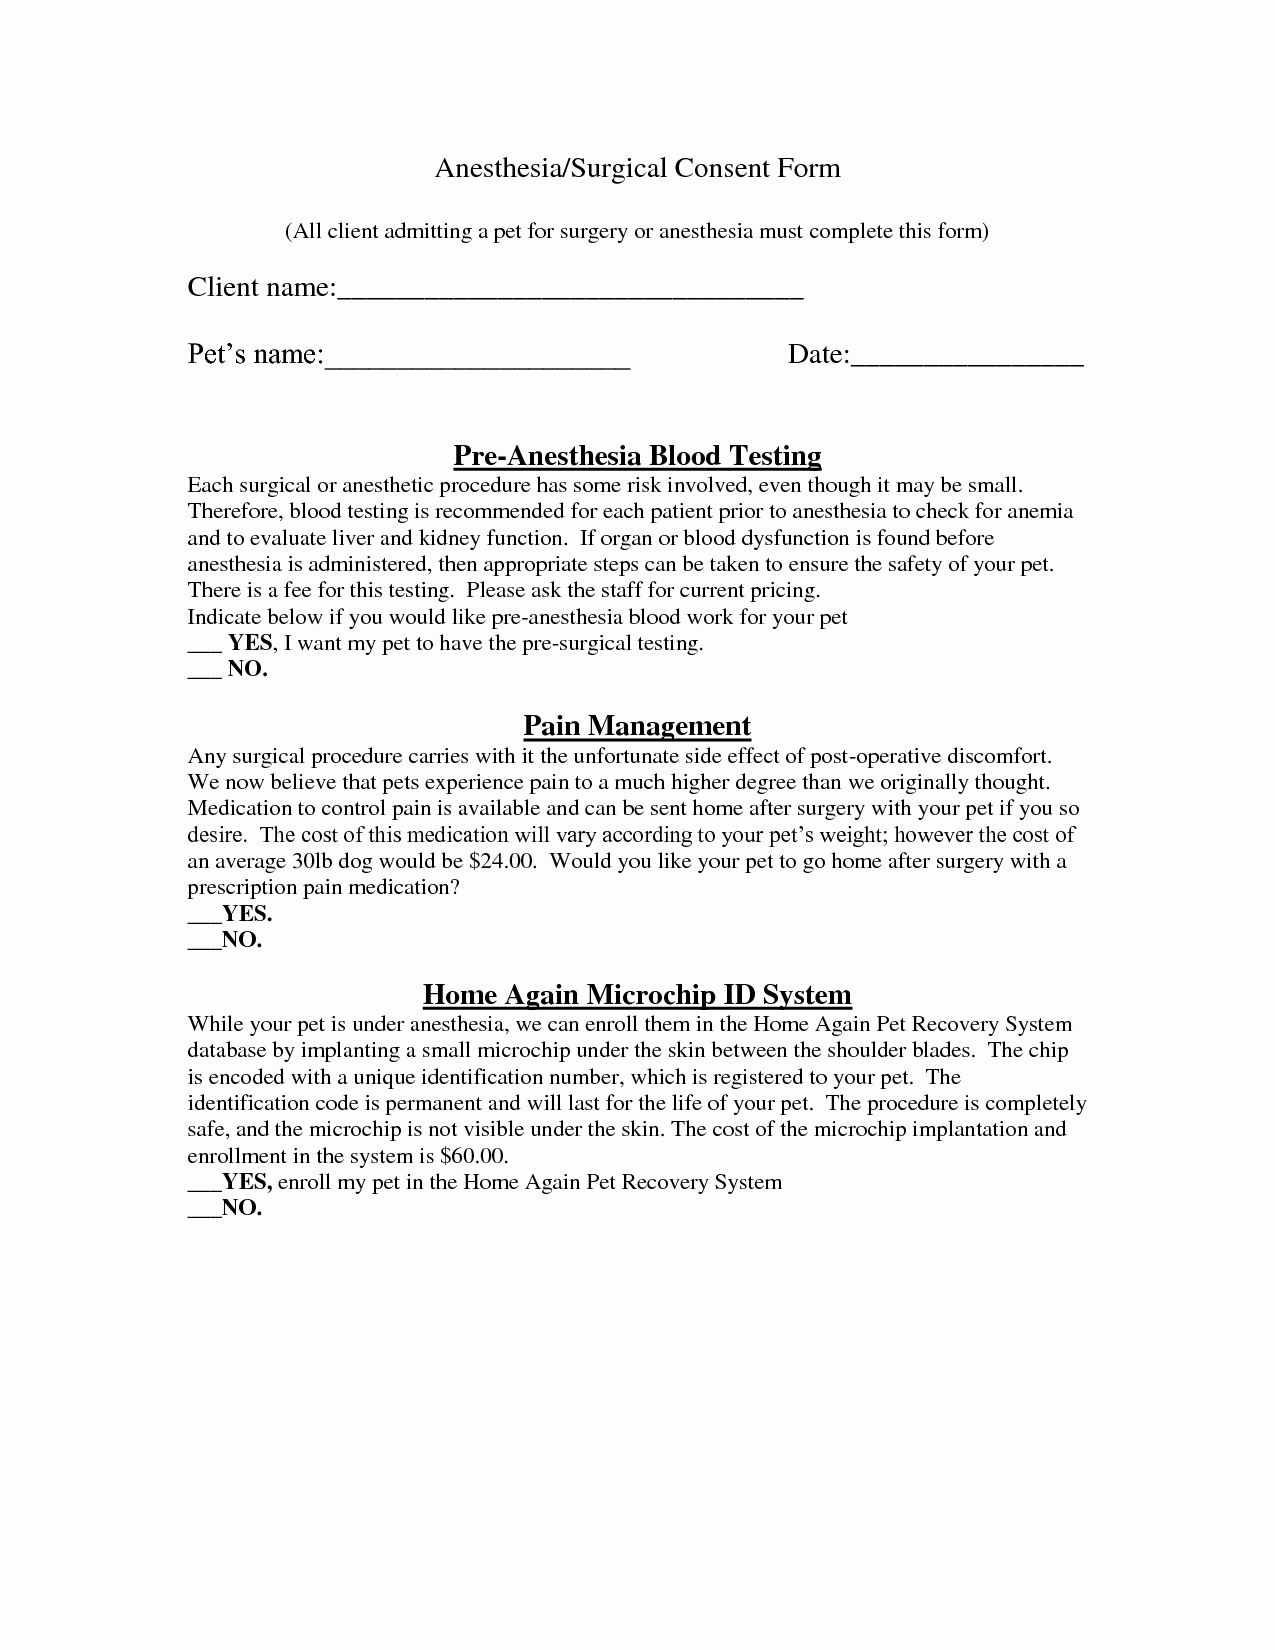 Procedure Consent form Beautiful Veterinary Surgical Consent form Template